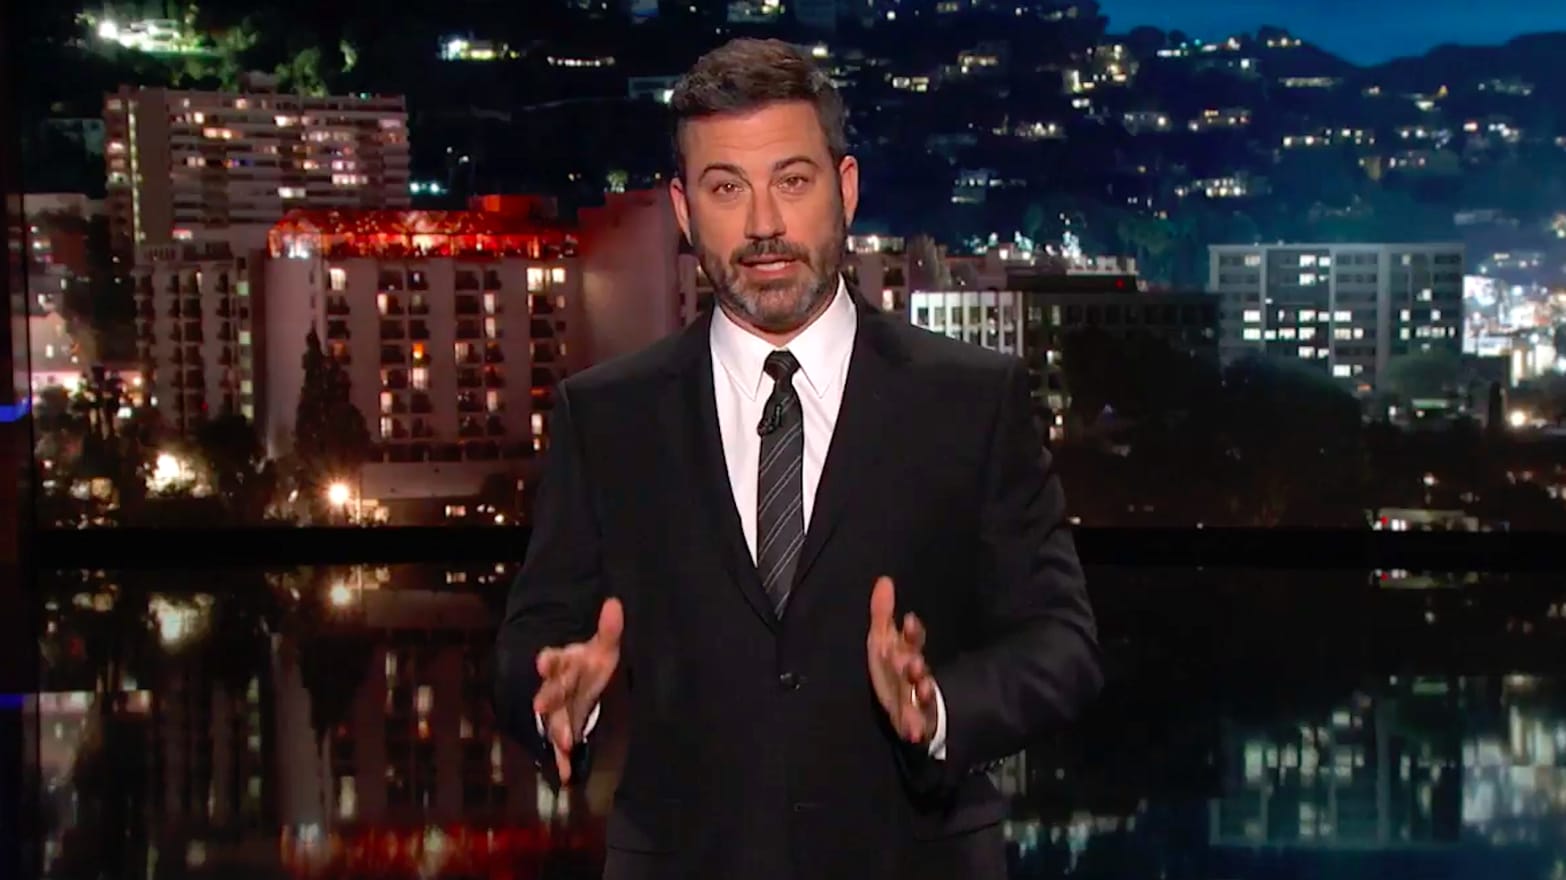 Jimmy Kimmel Makes Confession About Working With Chuck SChumer